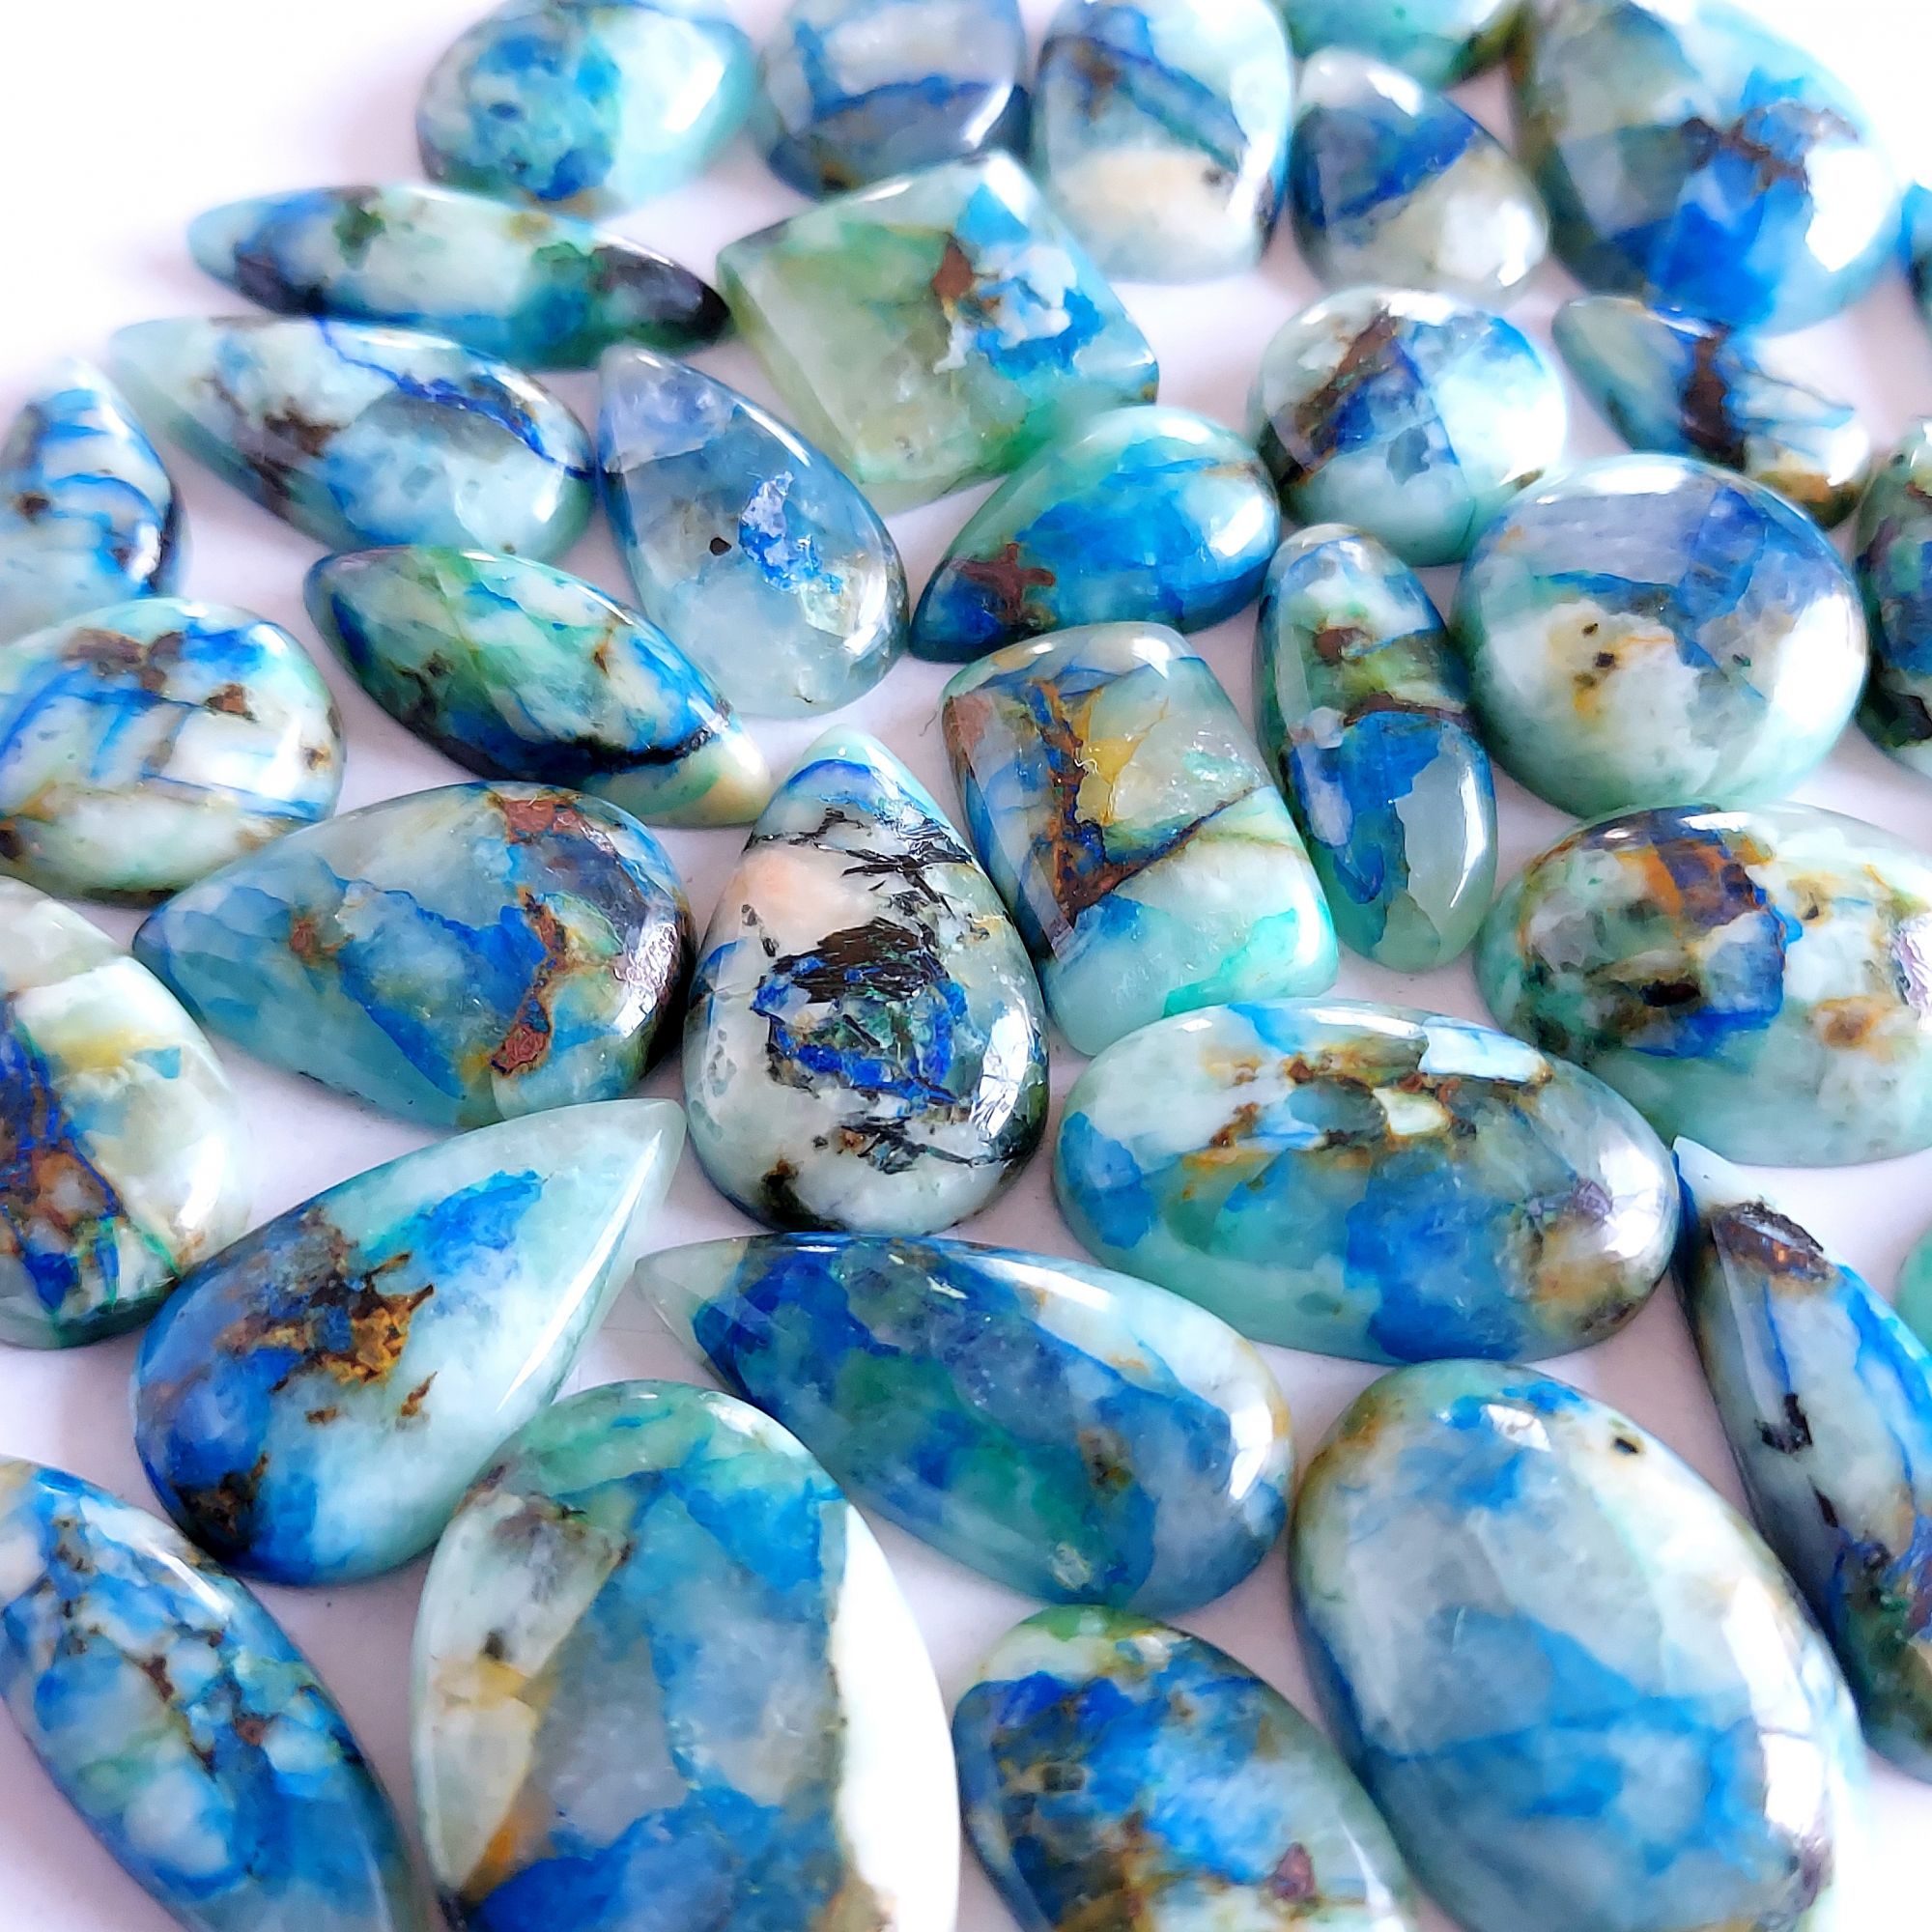 364.Cts 35 Pcs Natural Smooth Azurite Mix Loose Gemstone Cabochon Lot Size 25x17 17x10mm Wholesale Gemstone For jewelry